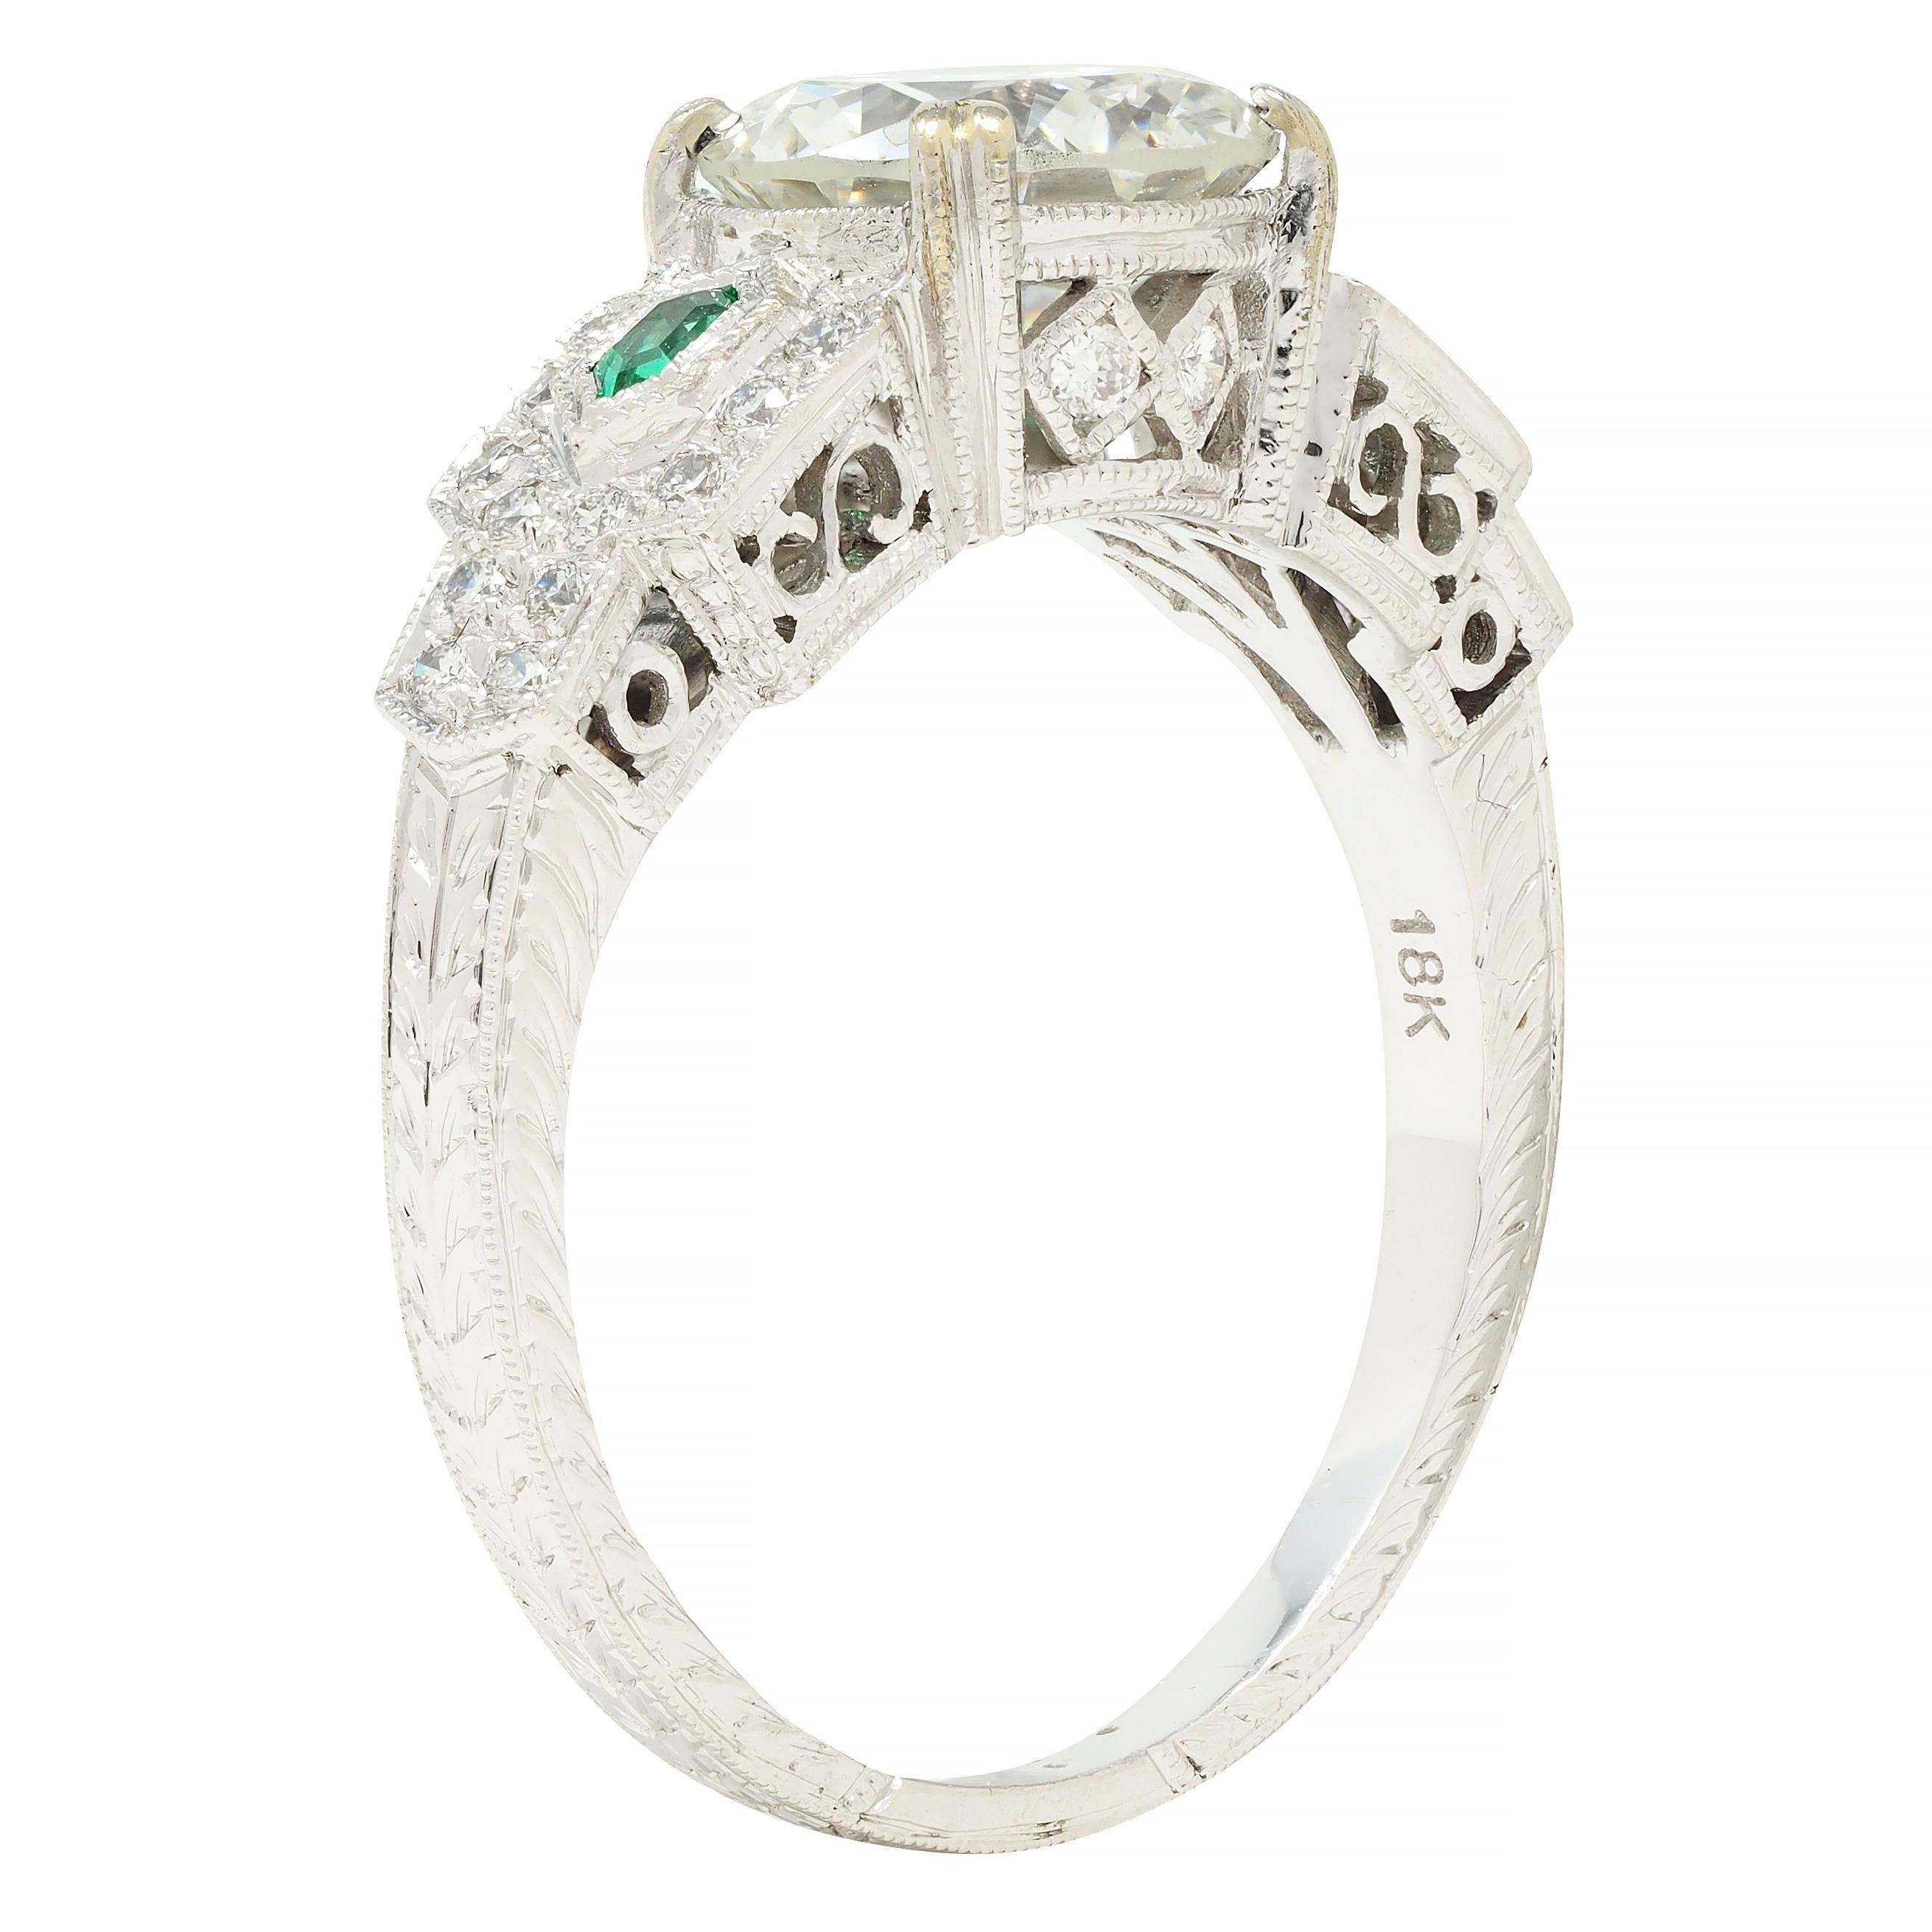 Centering an old European cut diamond weighing 1.83 carats - I color with SI1 clarity
Set with split prongs in stylized basket and flanked by hexagonal cut emeralds
Weighing approximately 0.06 carat total - bezel set in geometric form shoulders
With